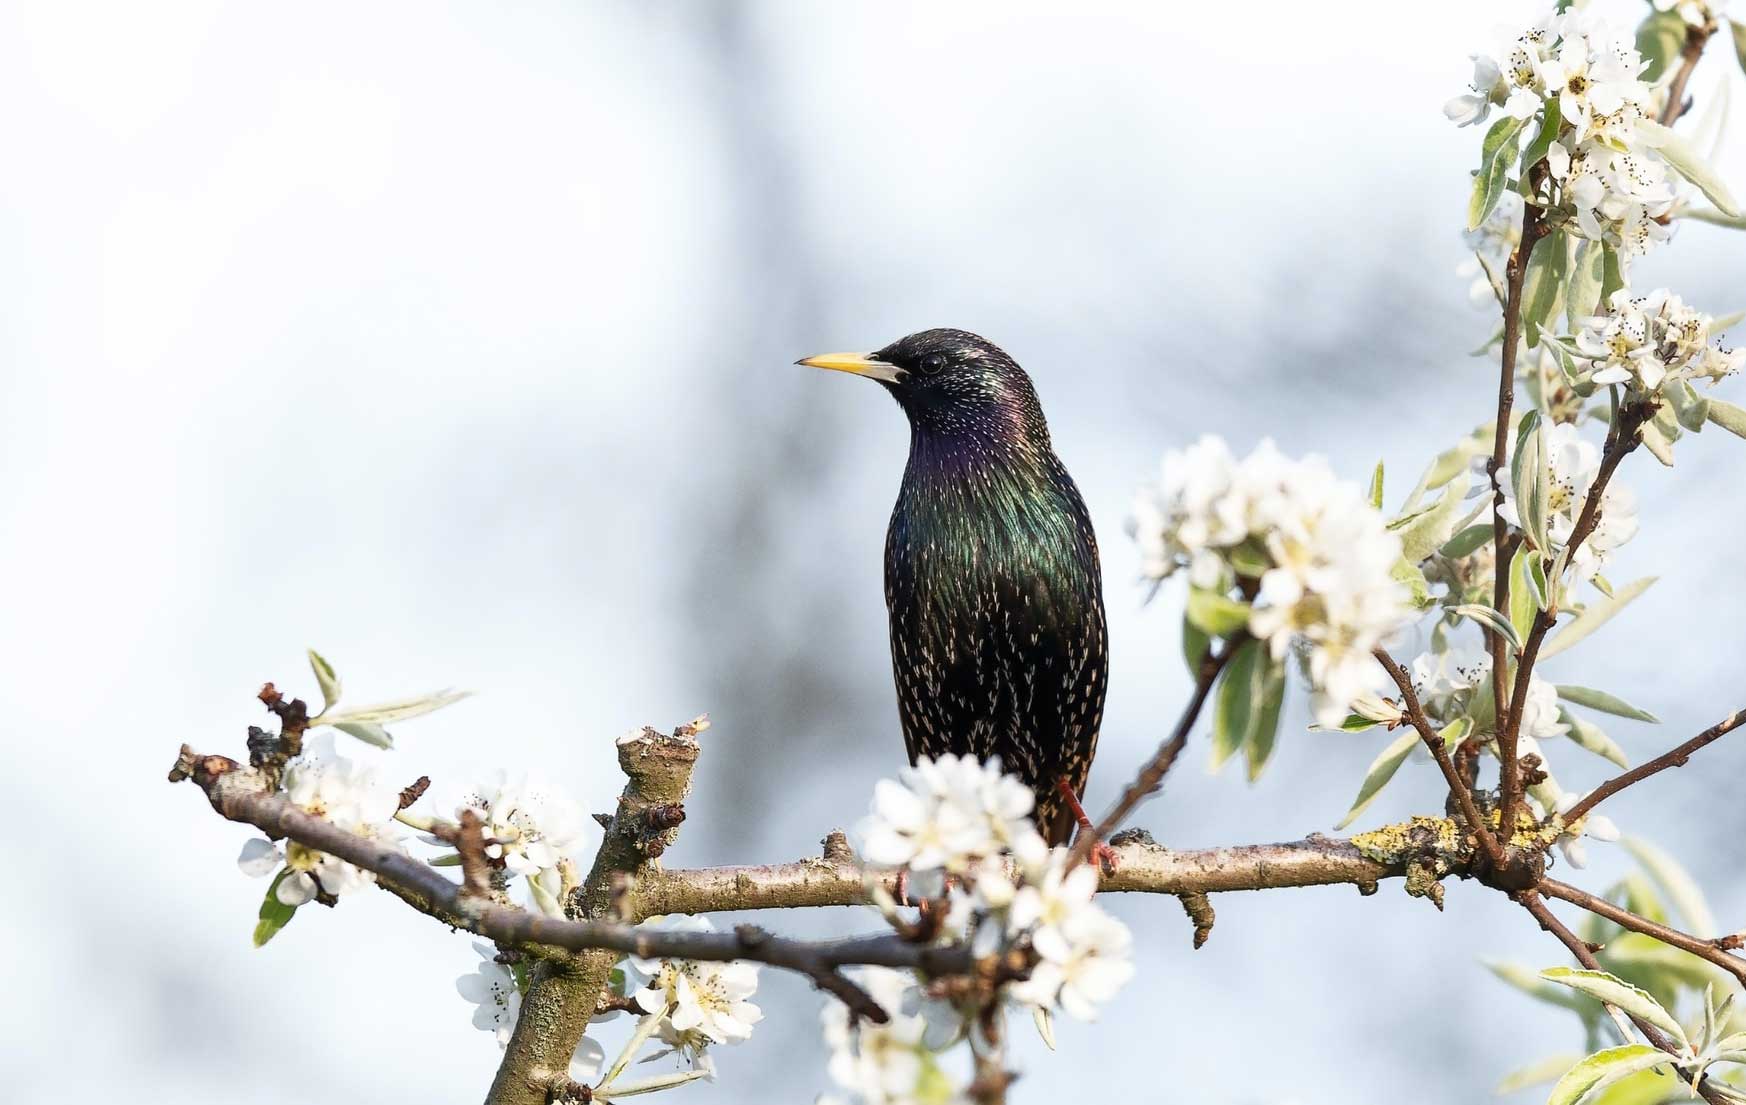 Starlings-Dawn-chorus-disappearing-from-UK-cities-how-to-bring-songbirds-to-your-urban-garden-according-to-experts